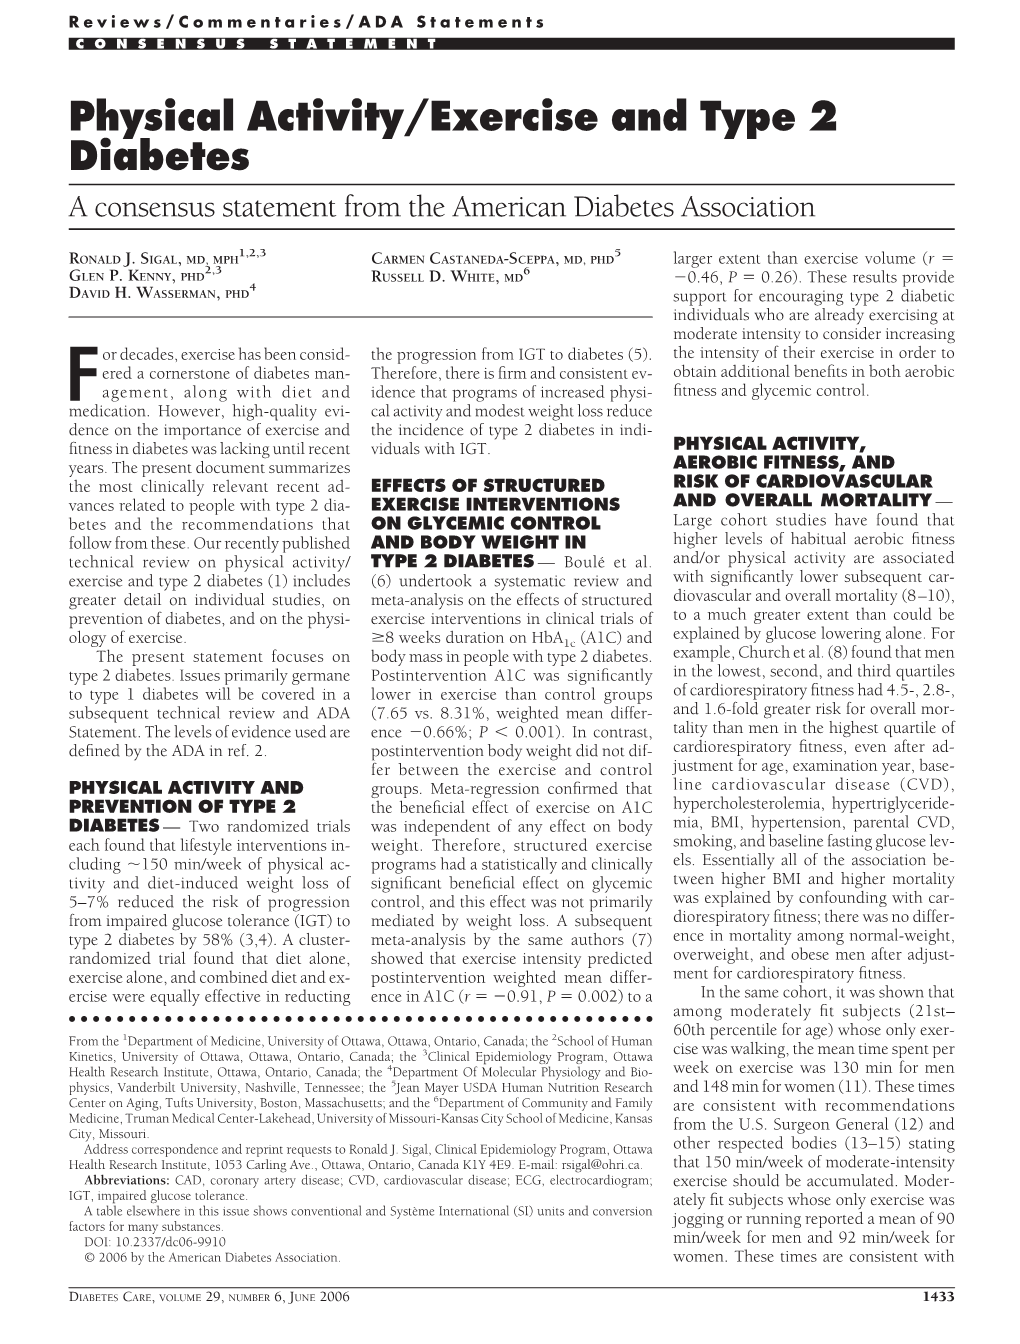 Physical Activity/Exercise and Type 2 Diabetes a Consensus Statement from the American Diabetes Association